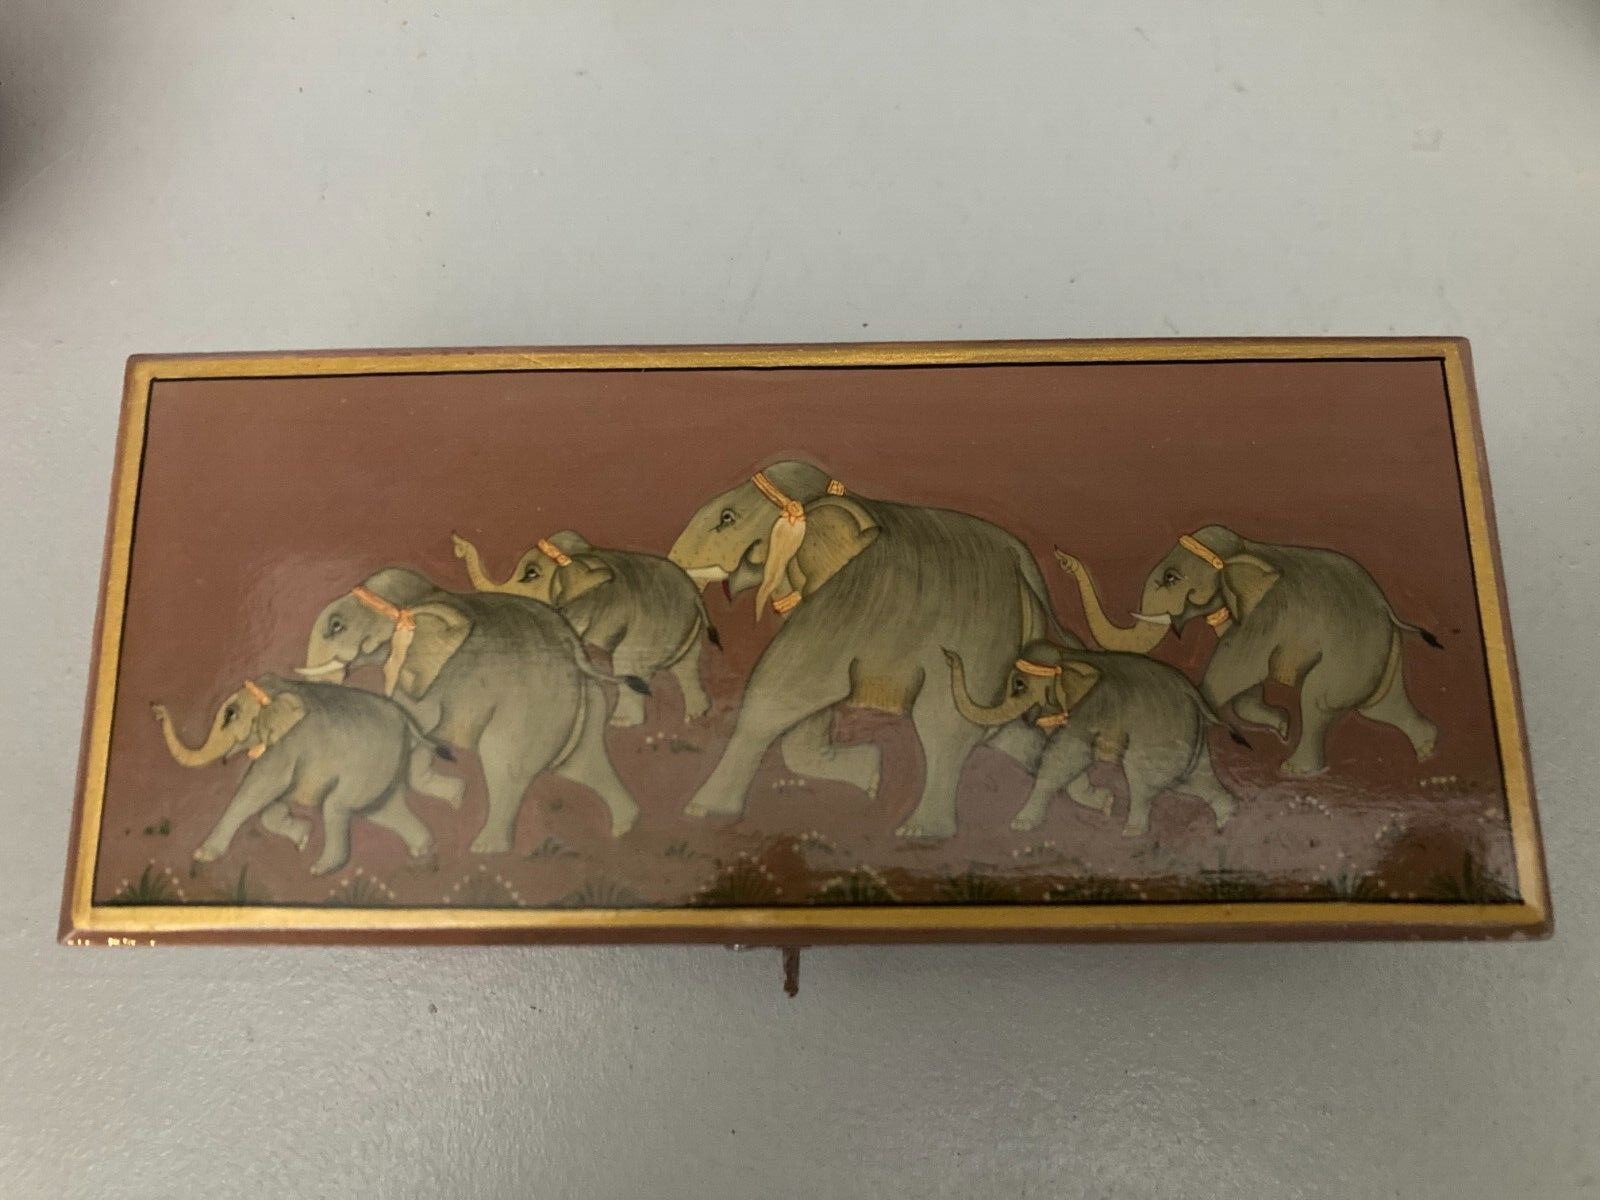 Vintage Wooden Trinket Box Jewelry Hinged & Latched With Running Elephants